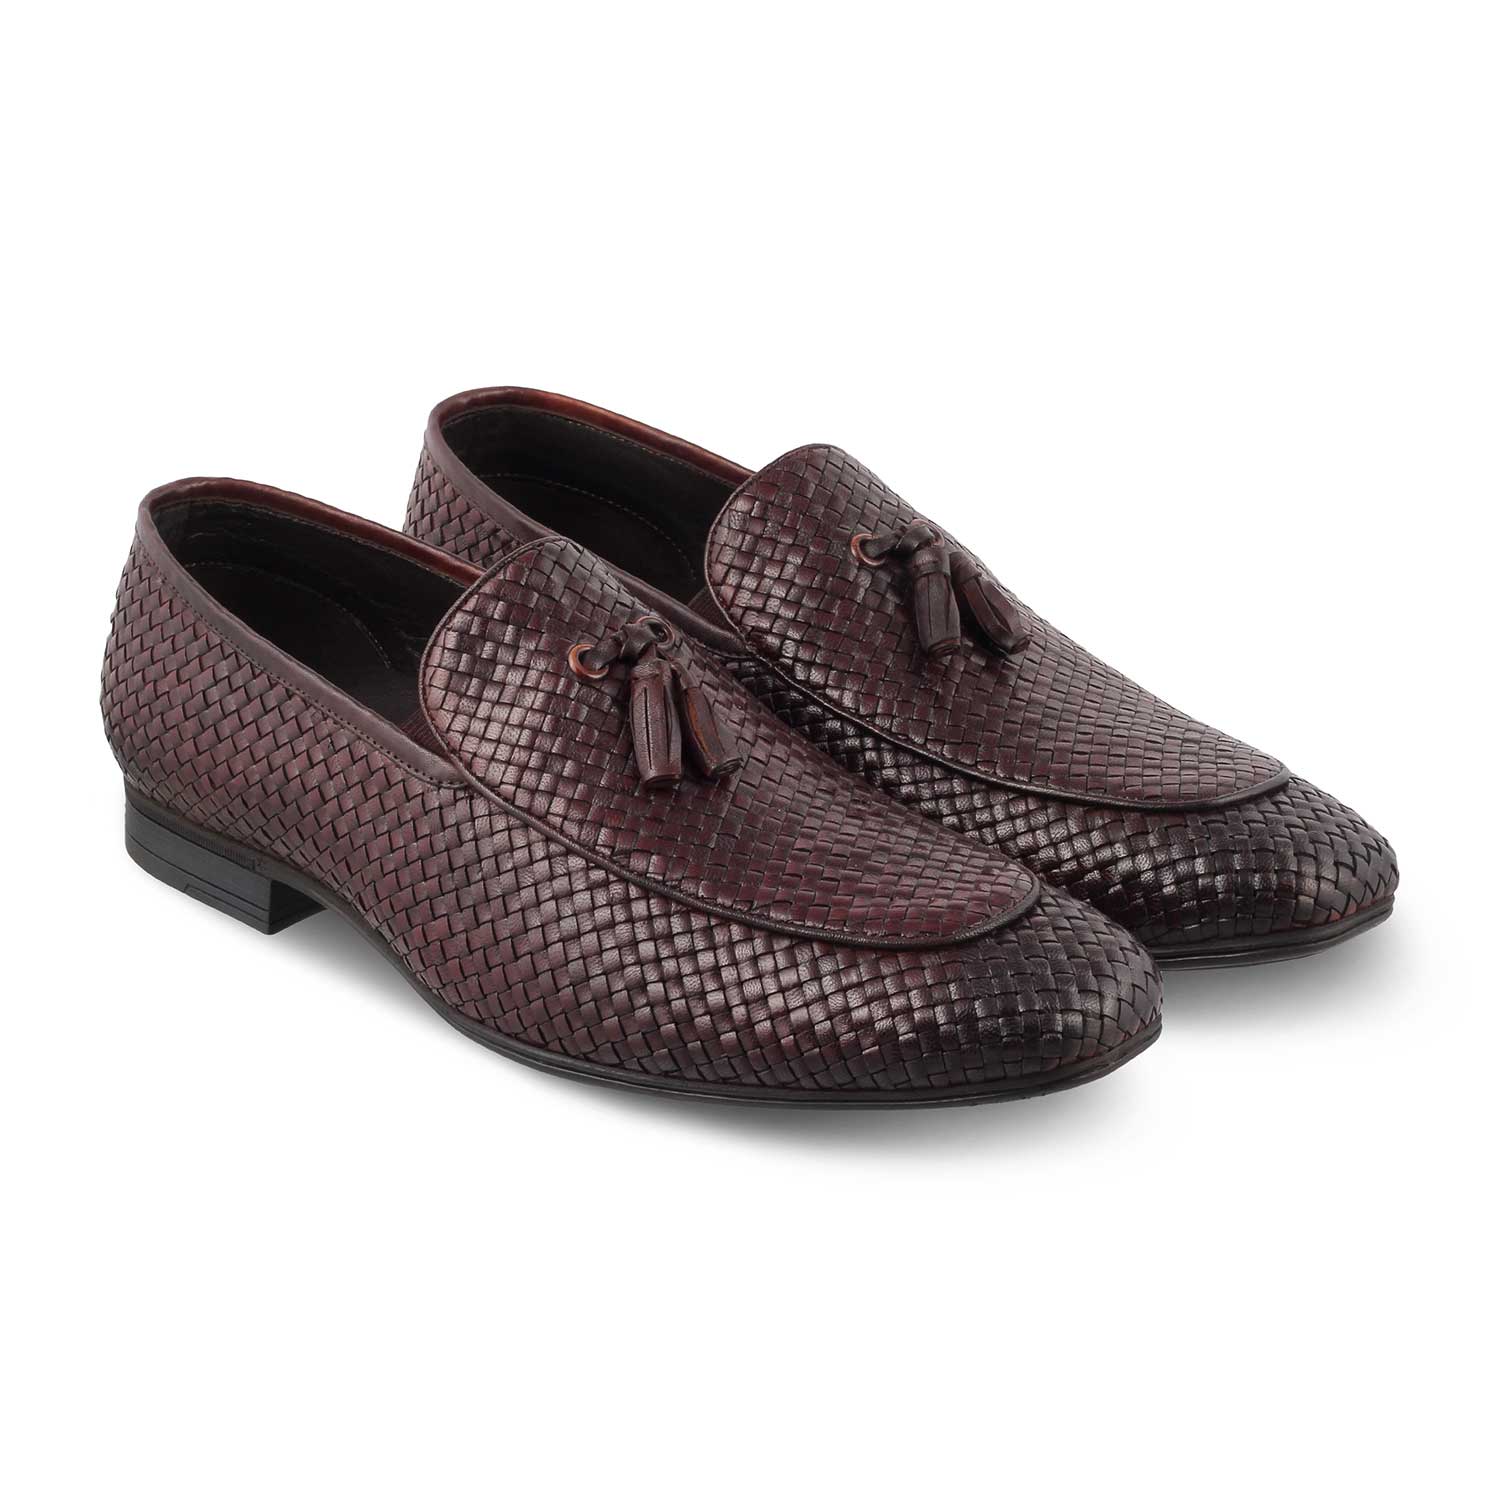 The Soweave Brown Men's Leather Tassel Loafers Tresmode - Tresmode